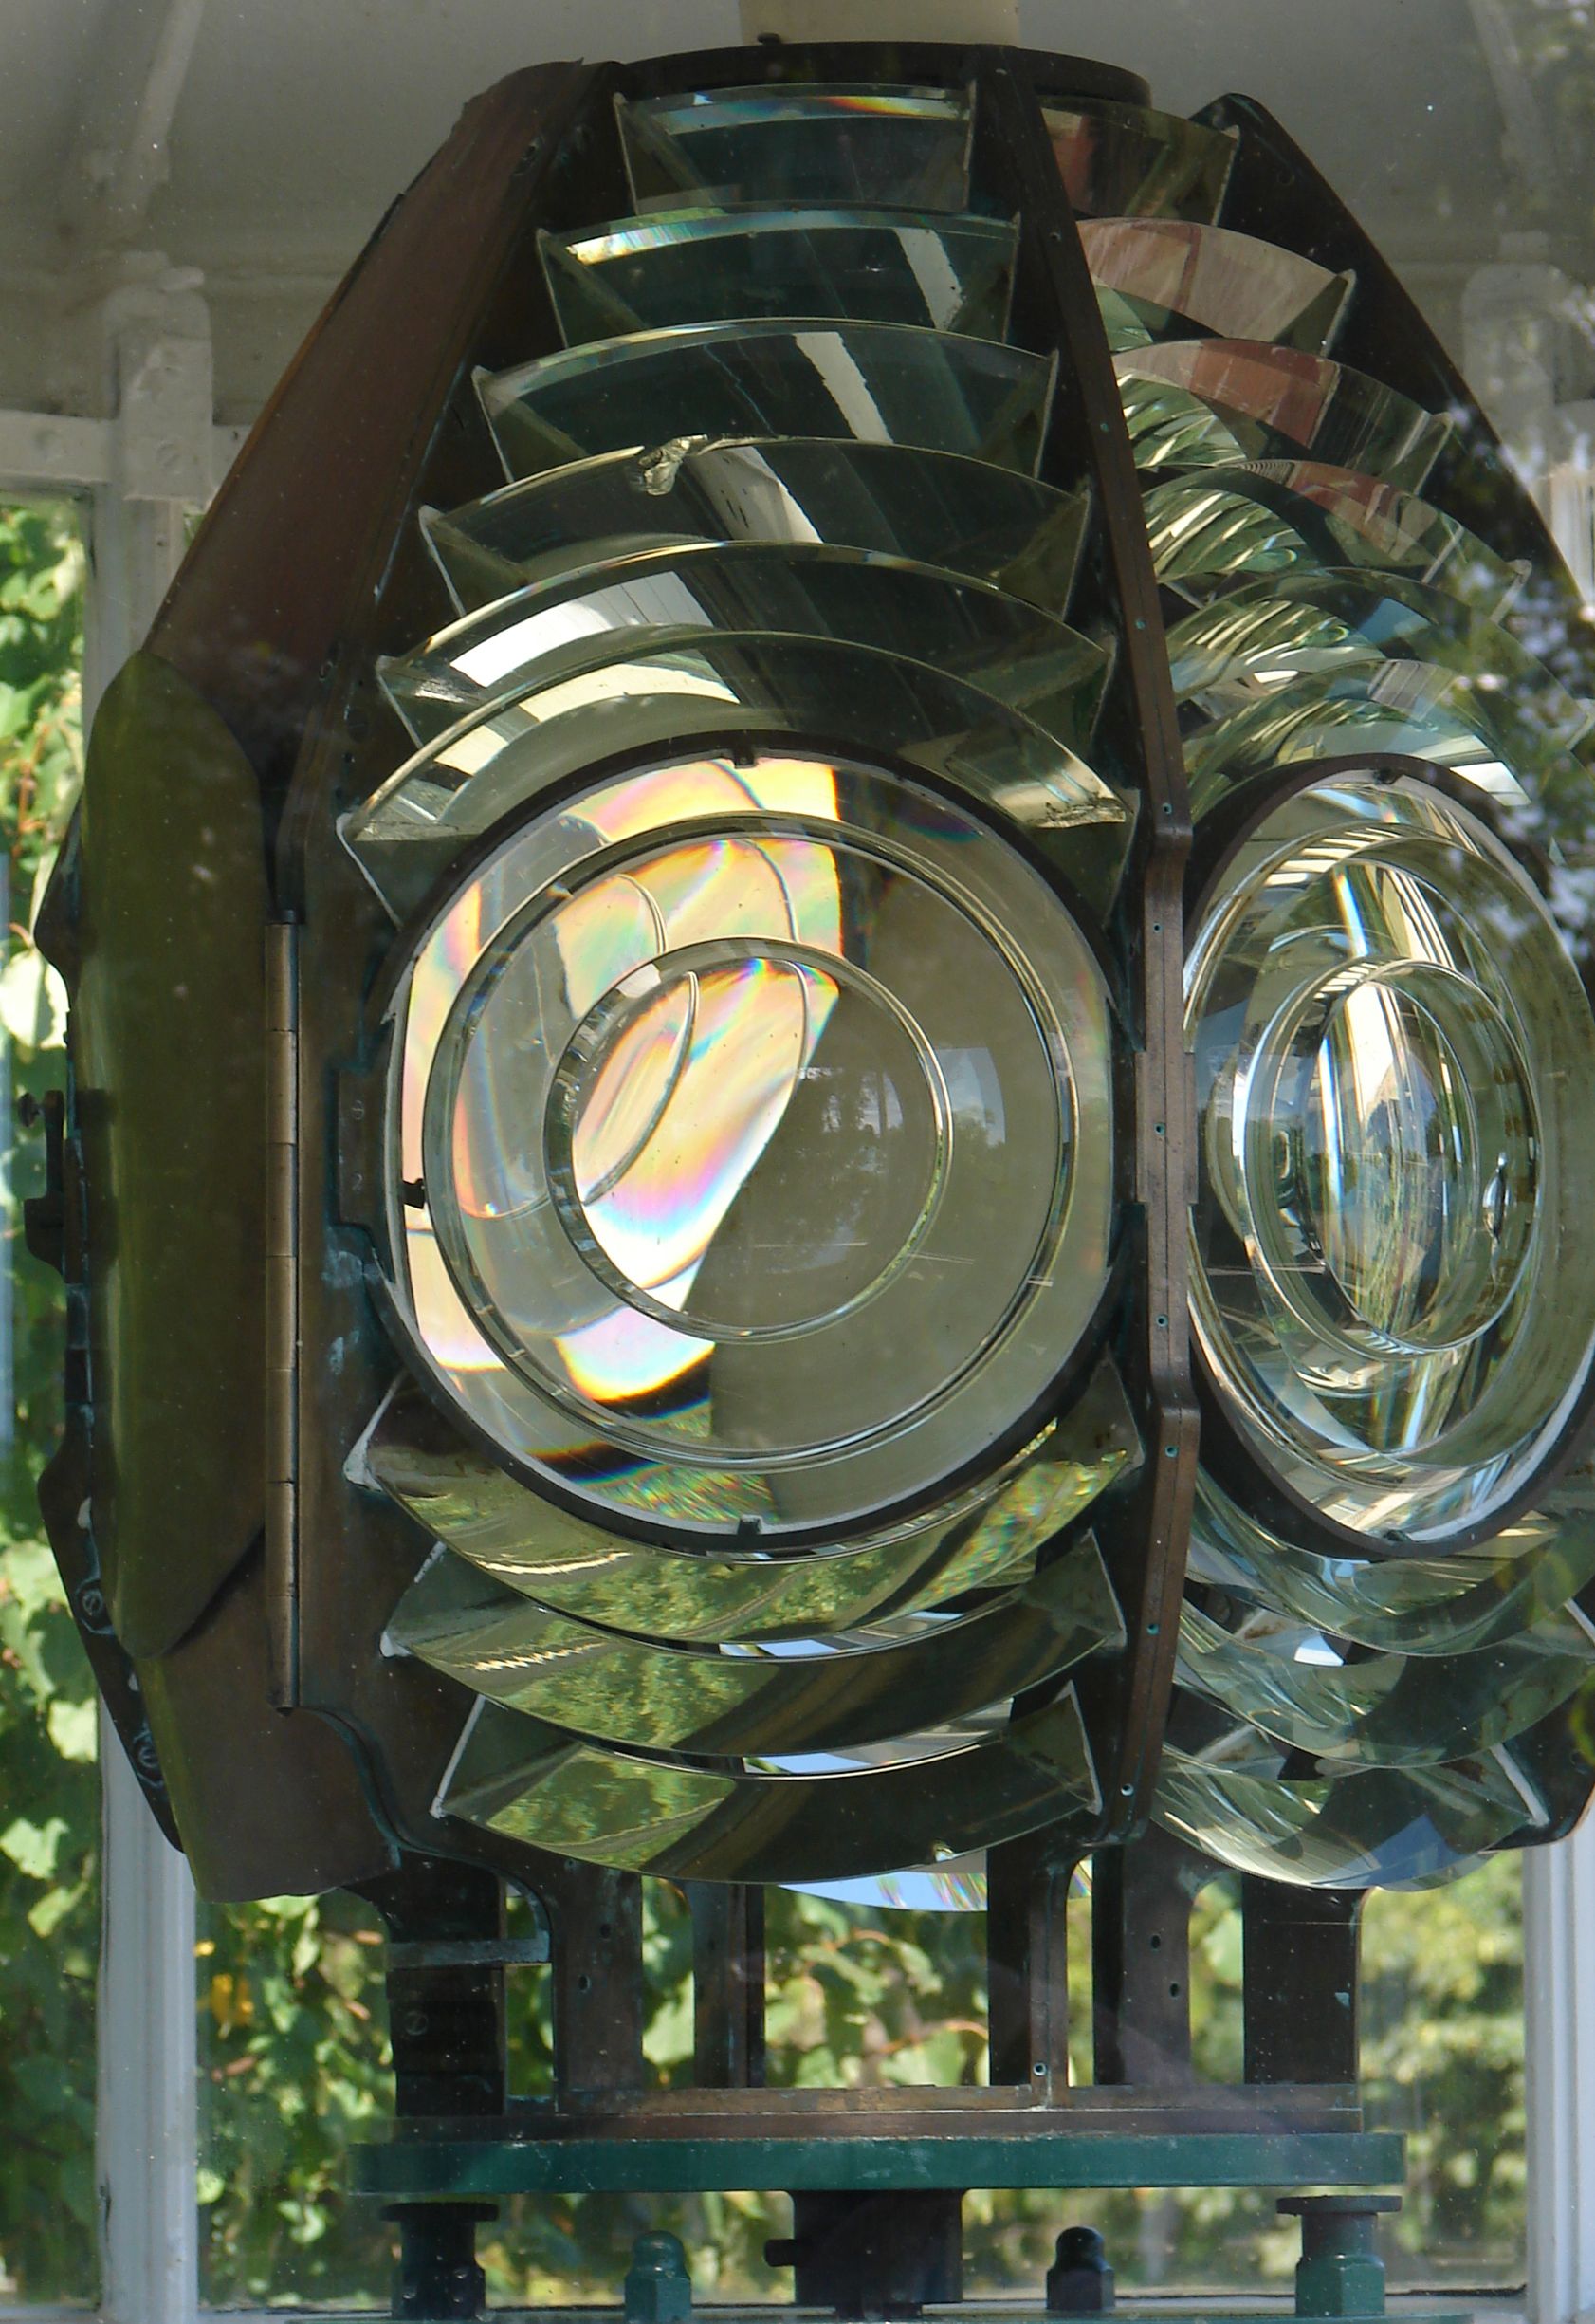 The 4th order Fresnel lens that was in Chatham light from